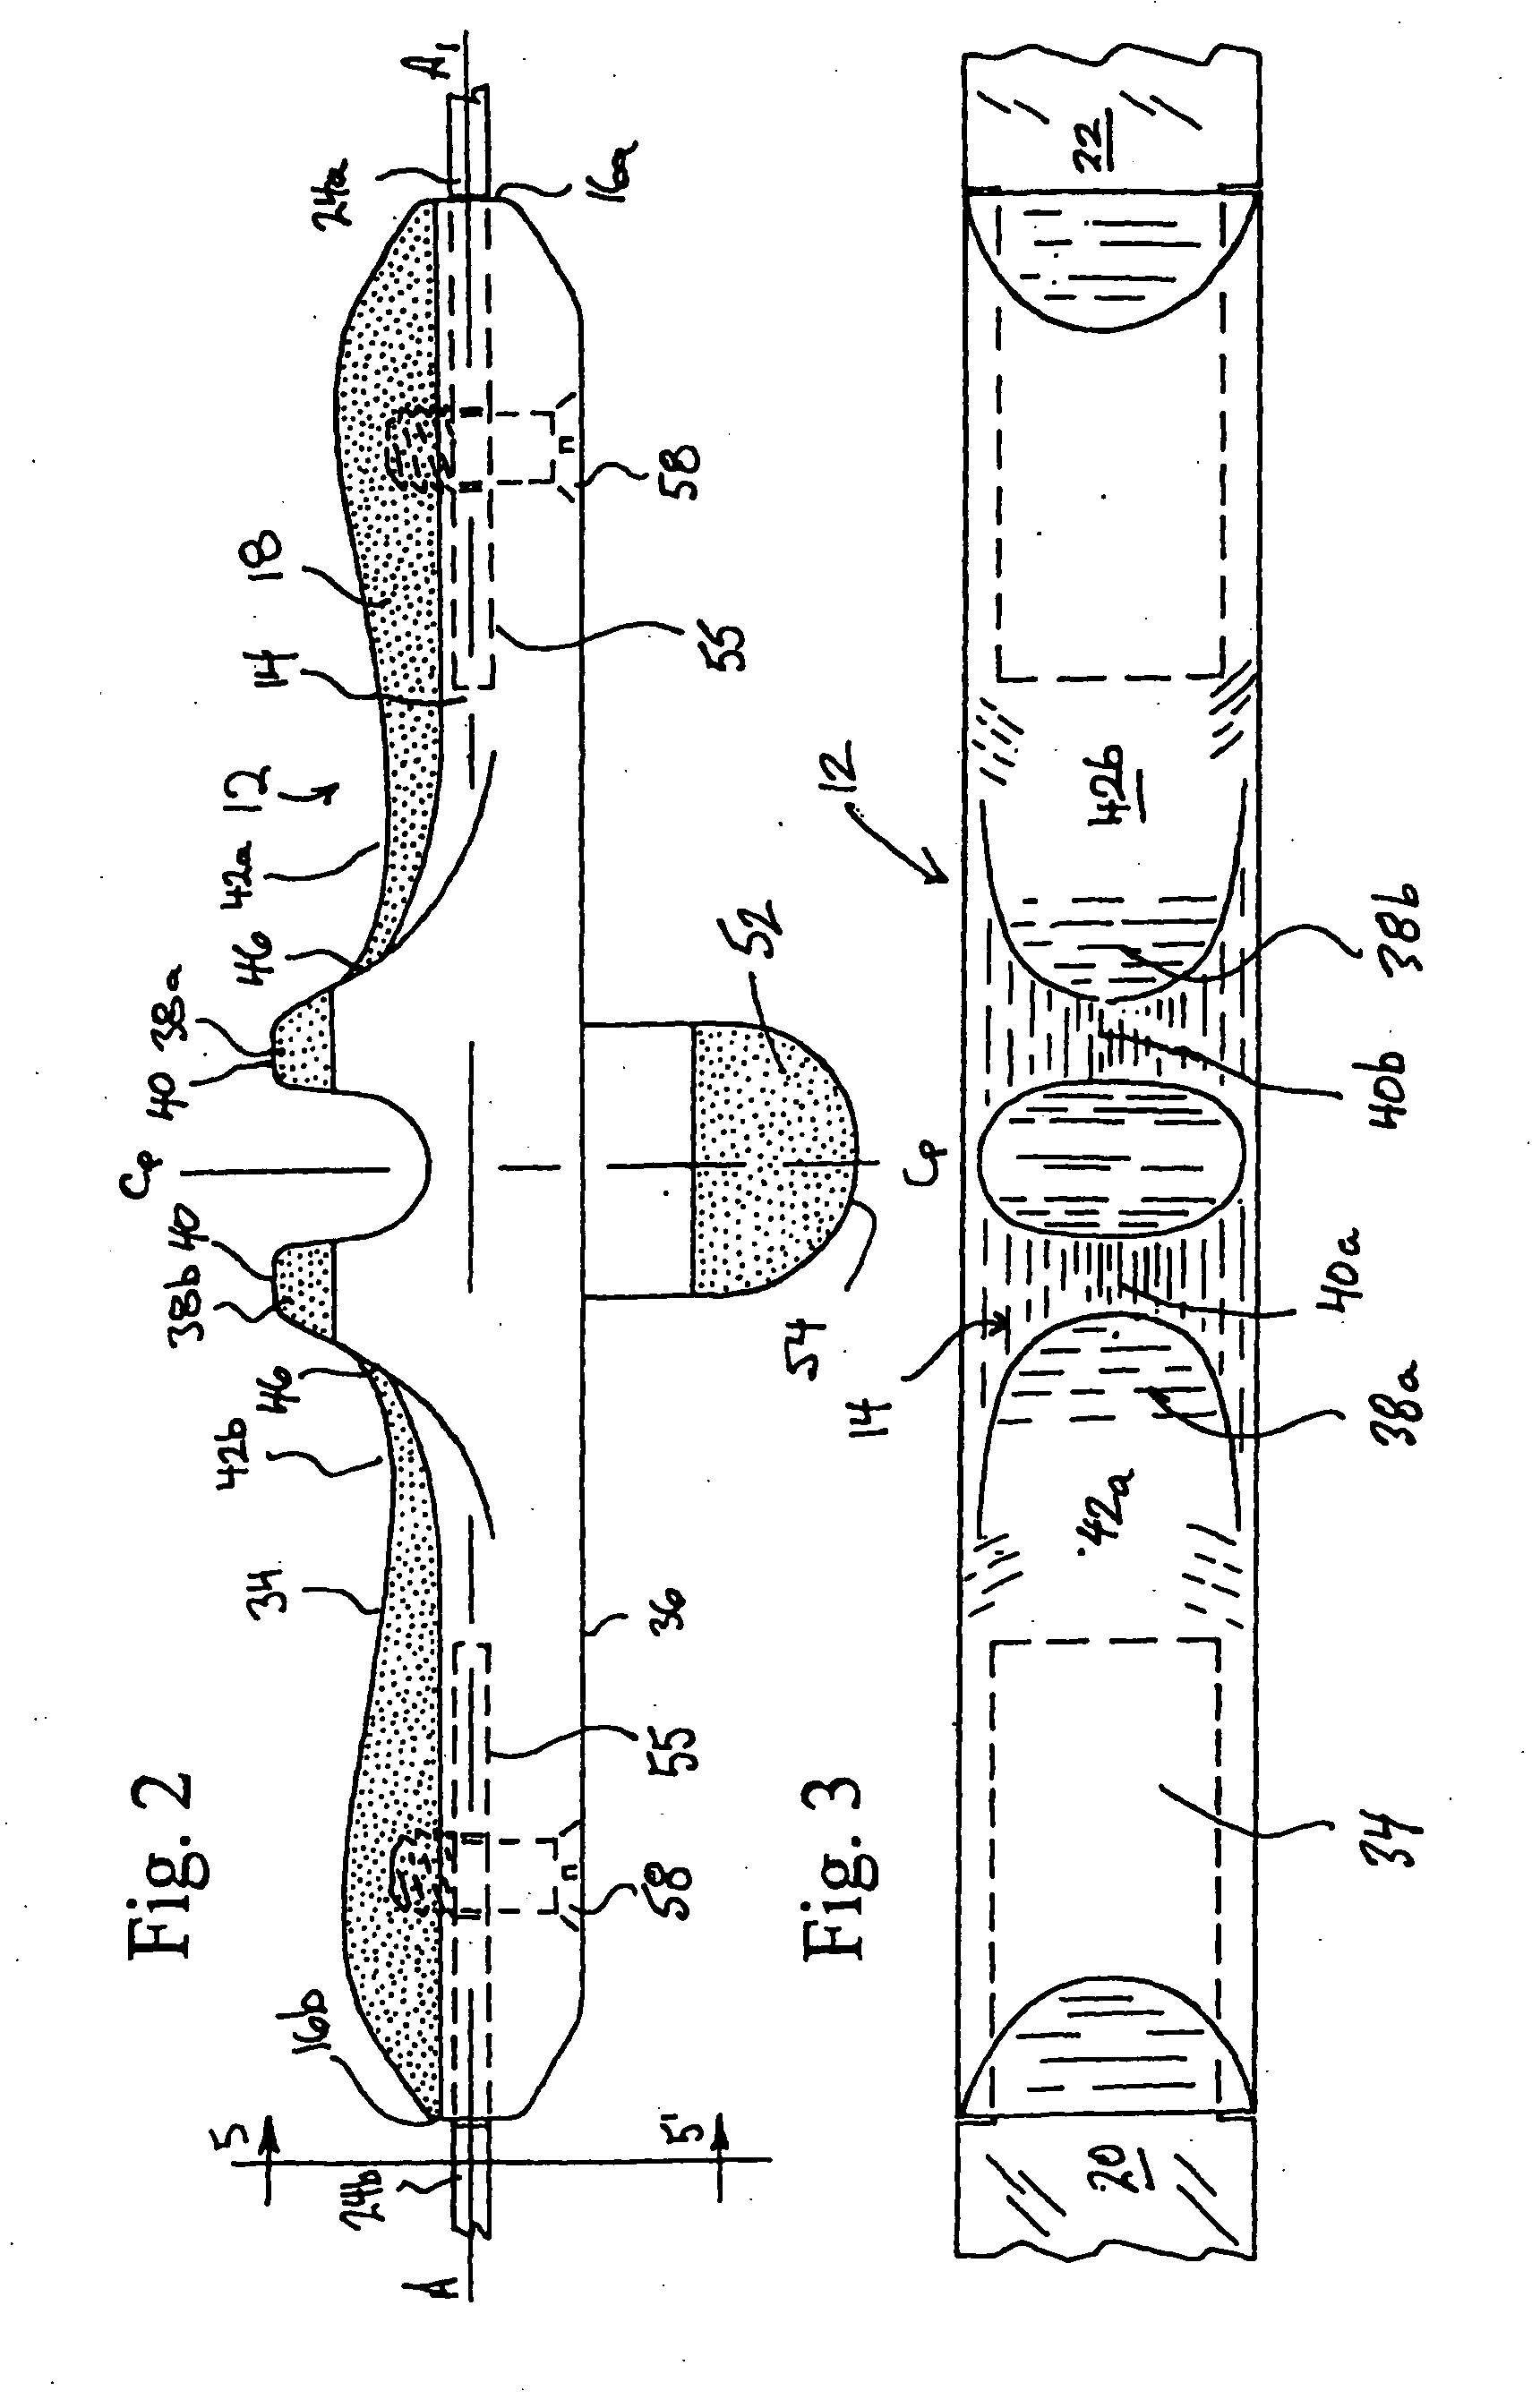 Physical Therapy Apparatus for Self-Administered Soft Tissue Manipulation